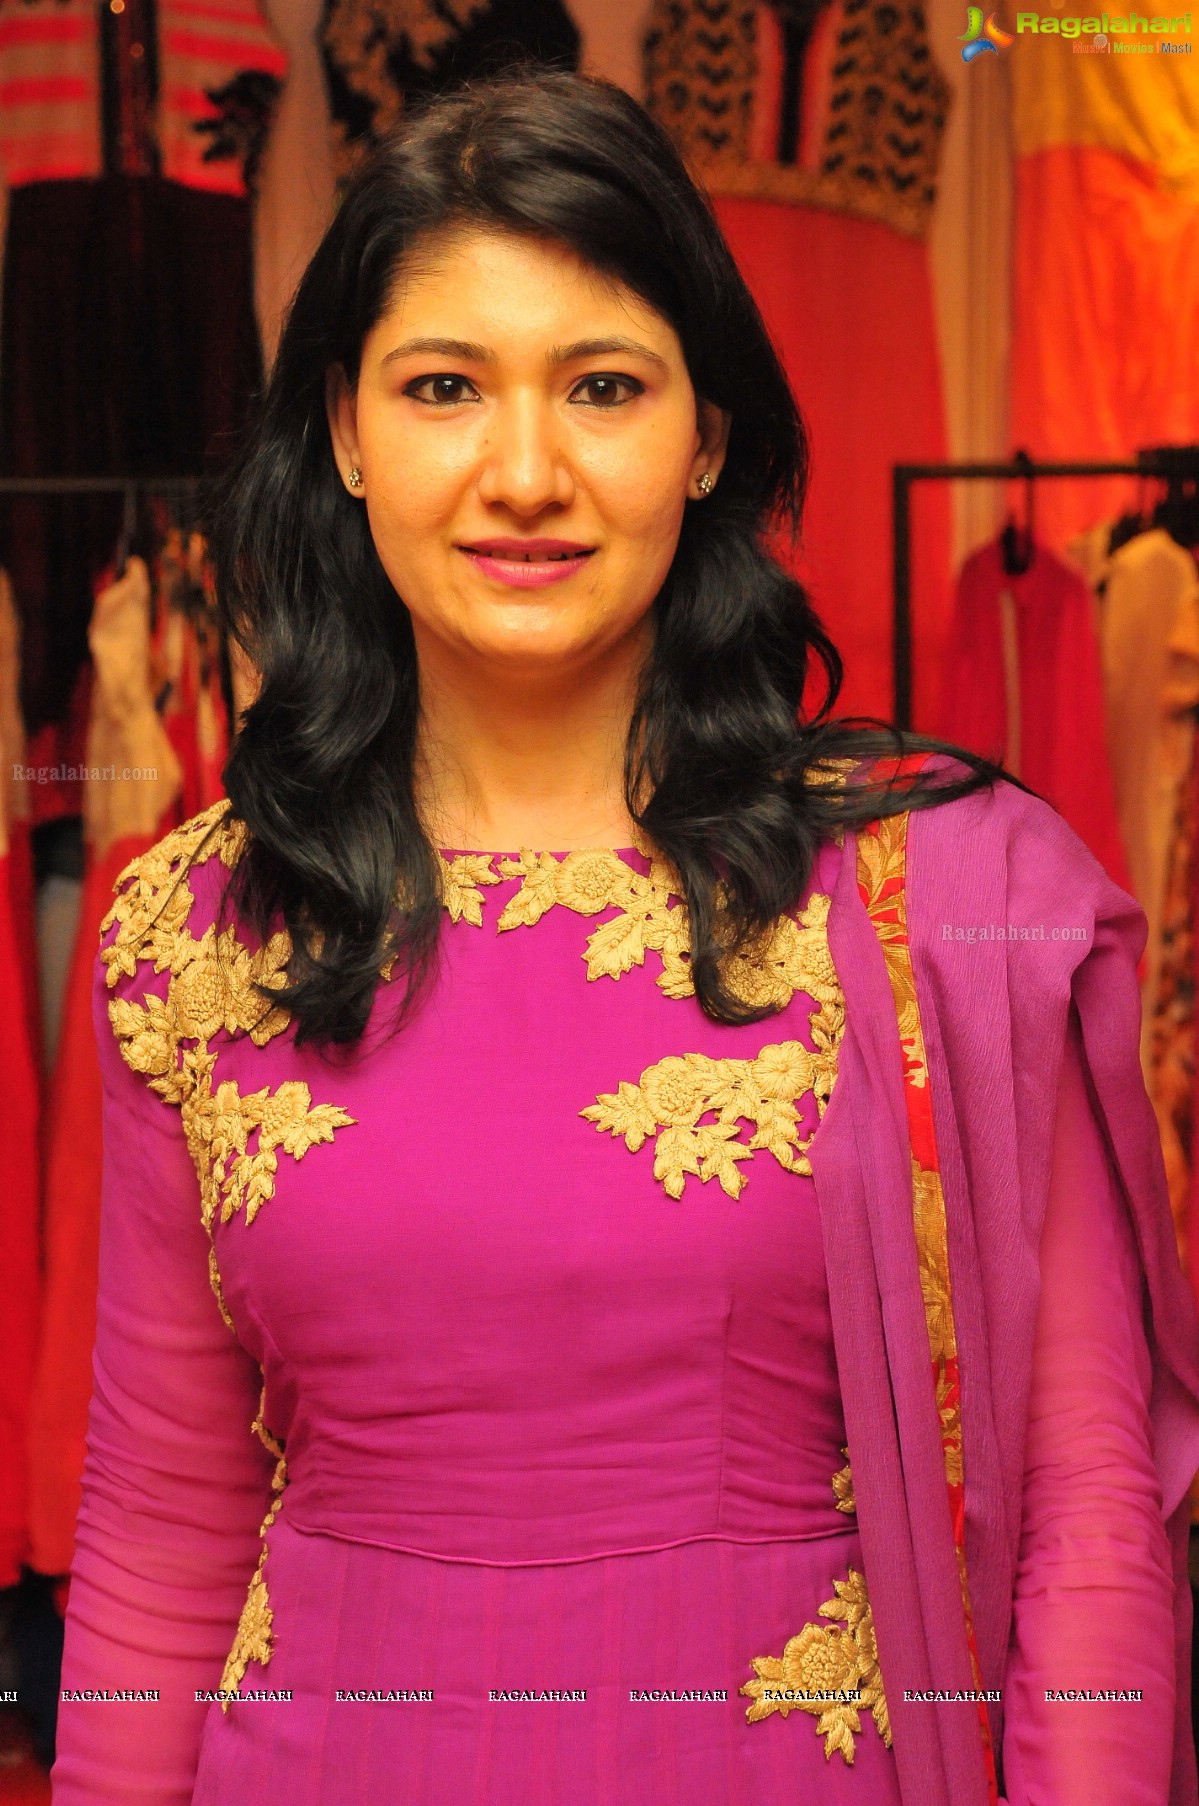 Akritti Elite 'Traditions and Fashions' Exhibition, Hyderabad